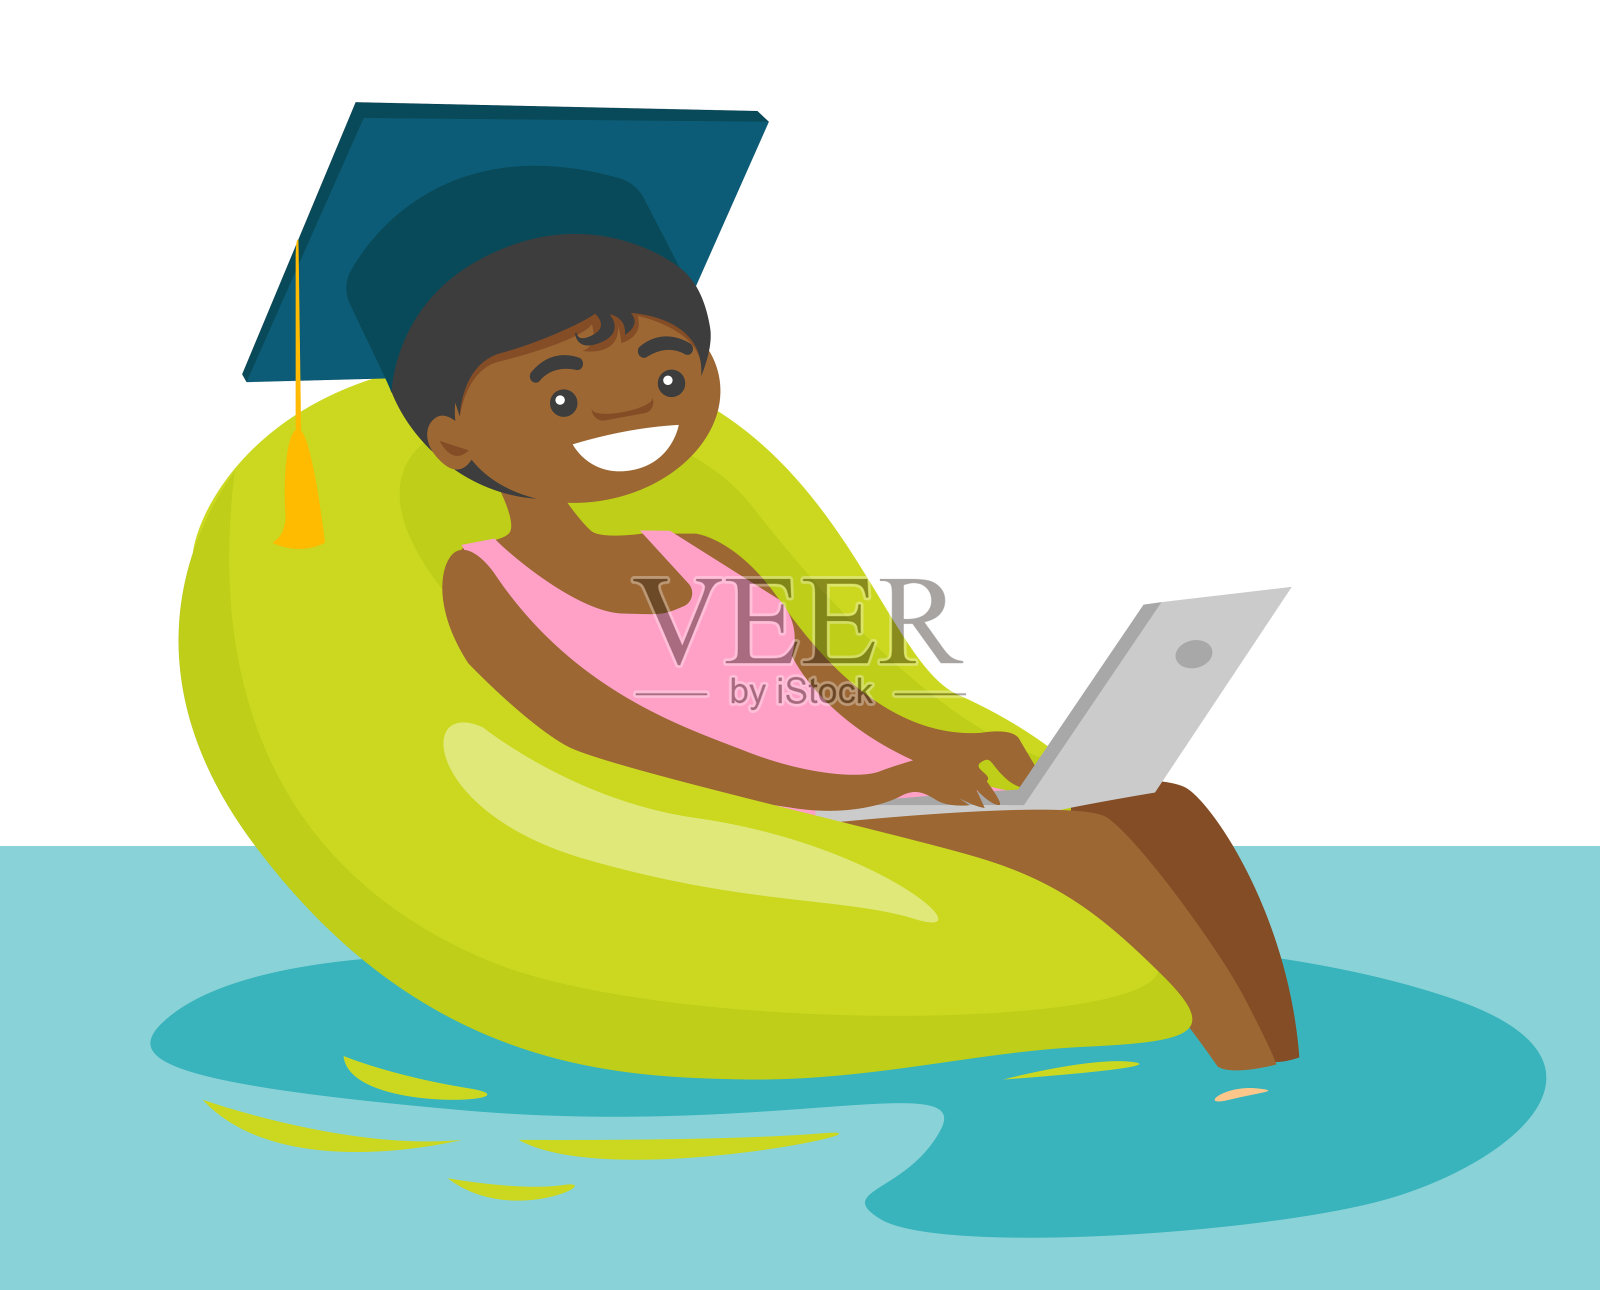 Graduate working on a laptop in the swimming pool插画图片素材